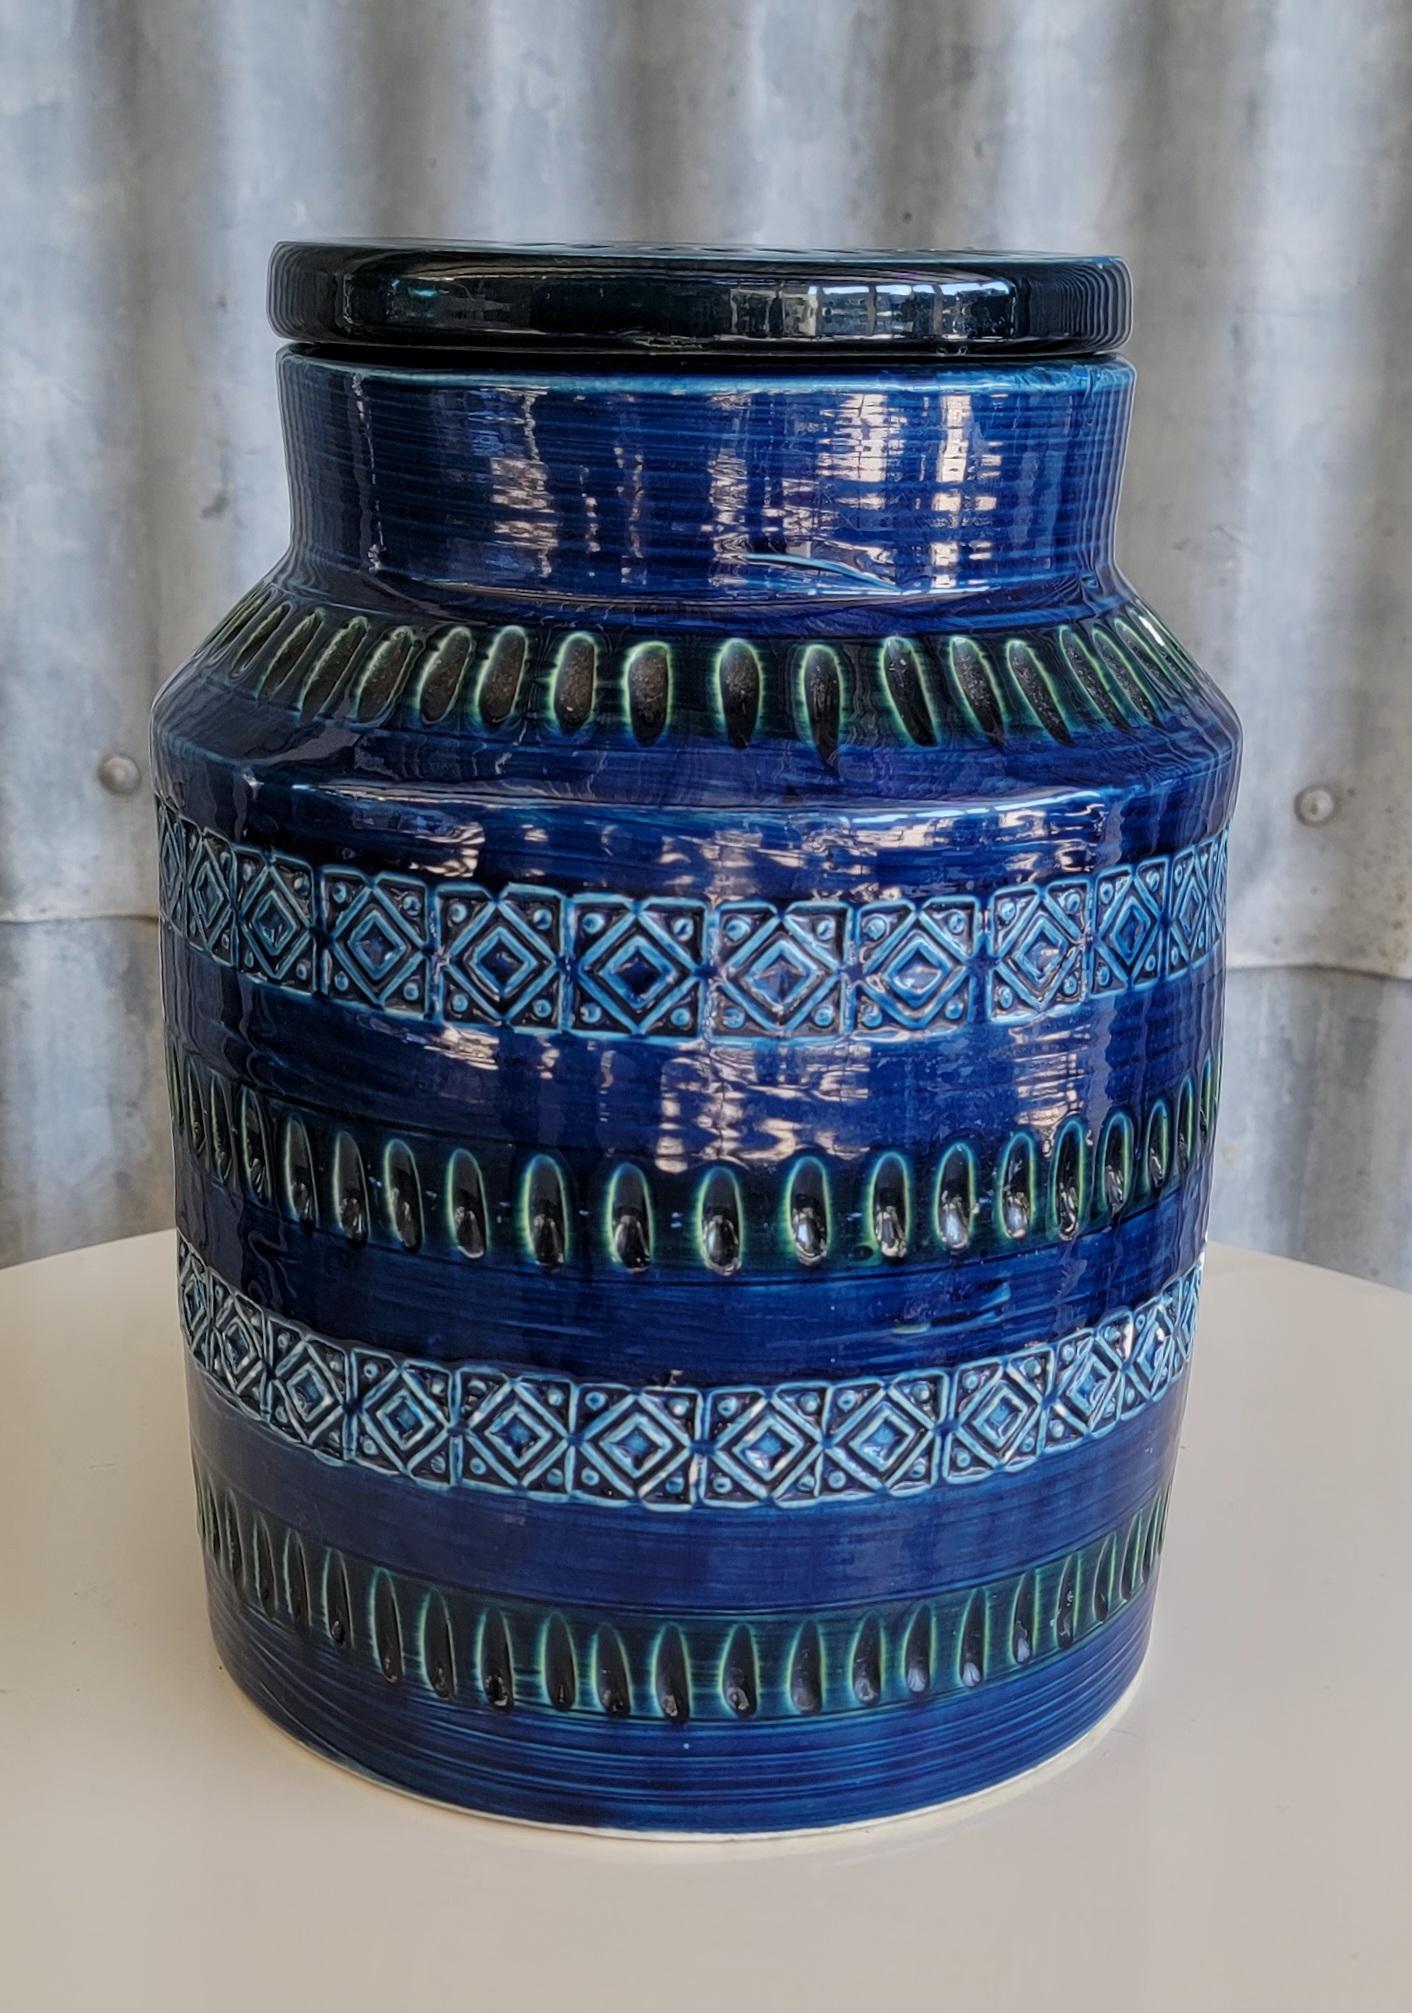 A lidded cookie jar or container by Bitossi Rimini Blu by Aldo Londi for Raymor. Retains 